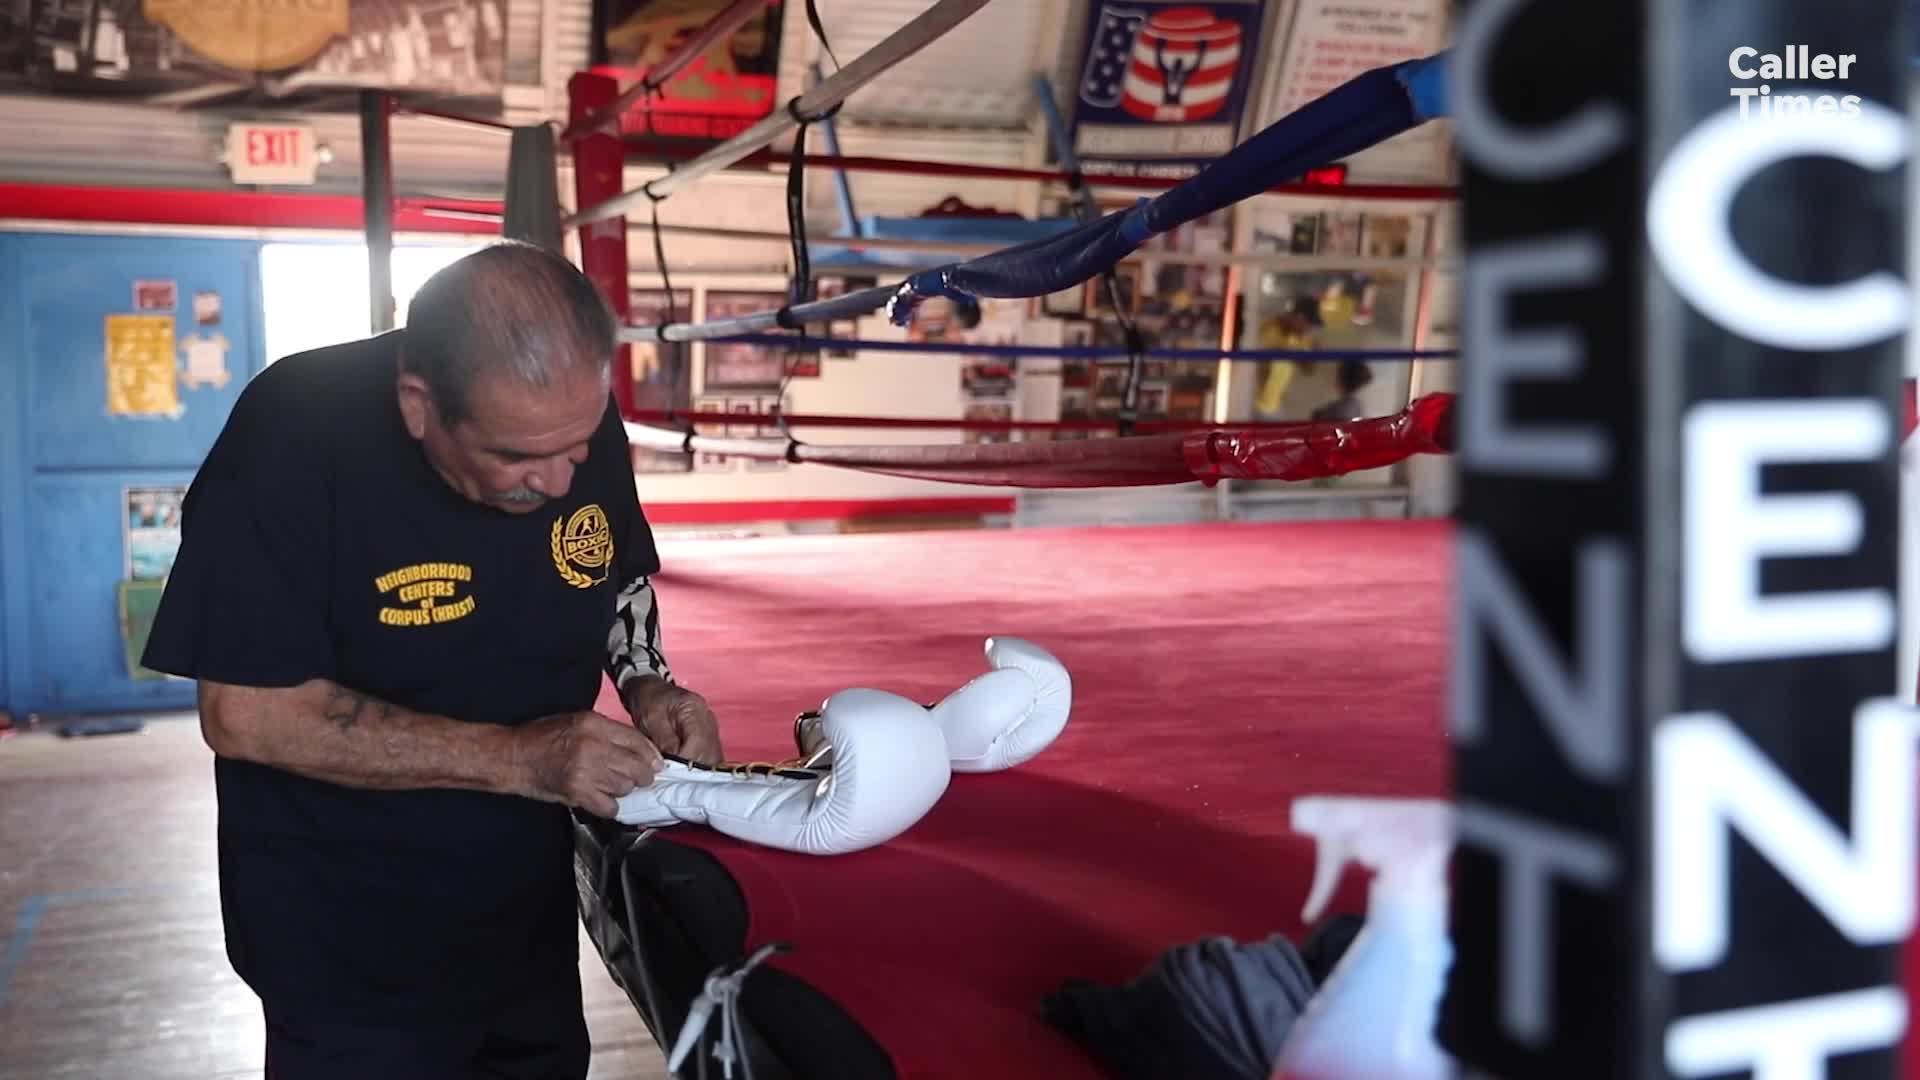 Boxing has been a staple in the Coastal Bend for decades